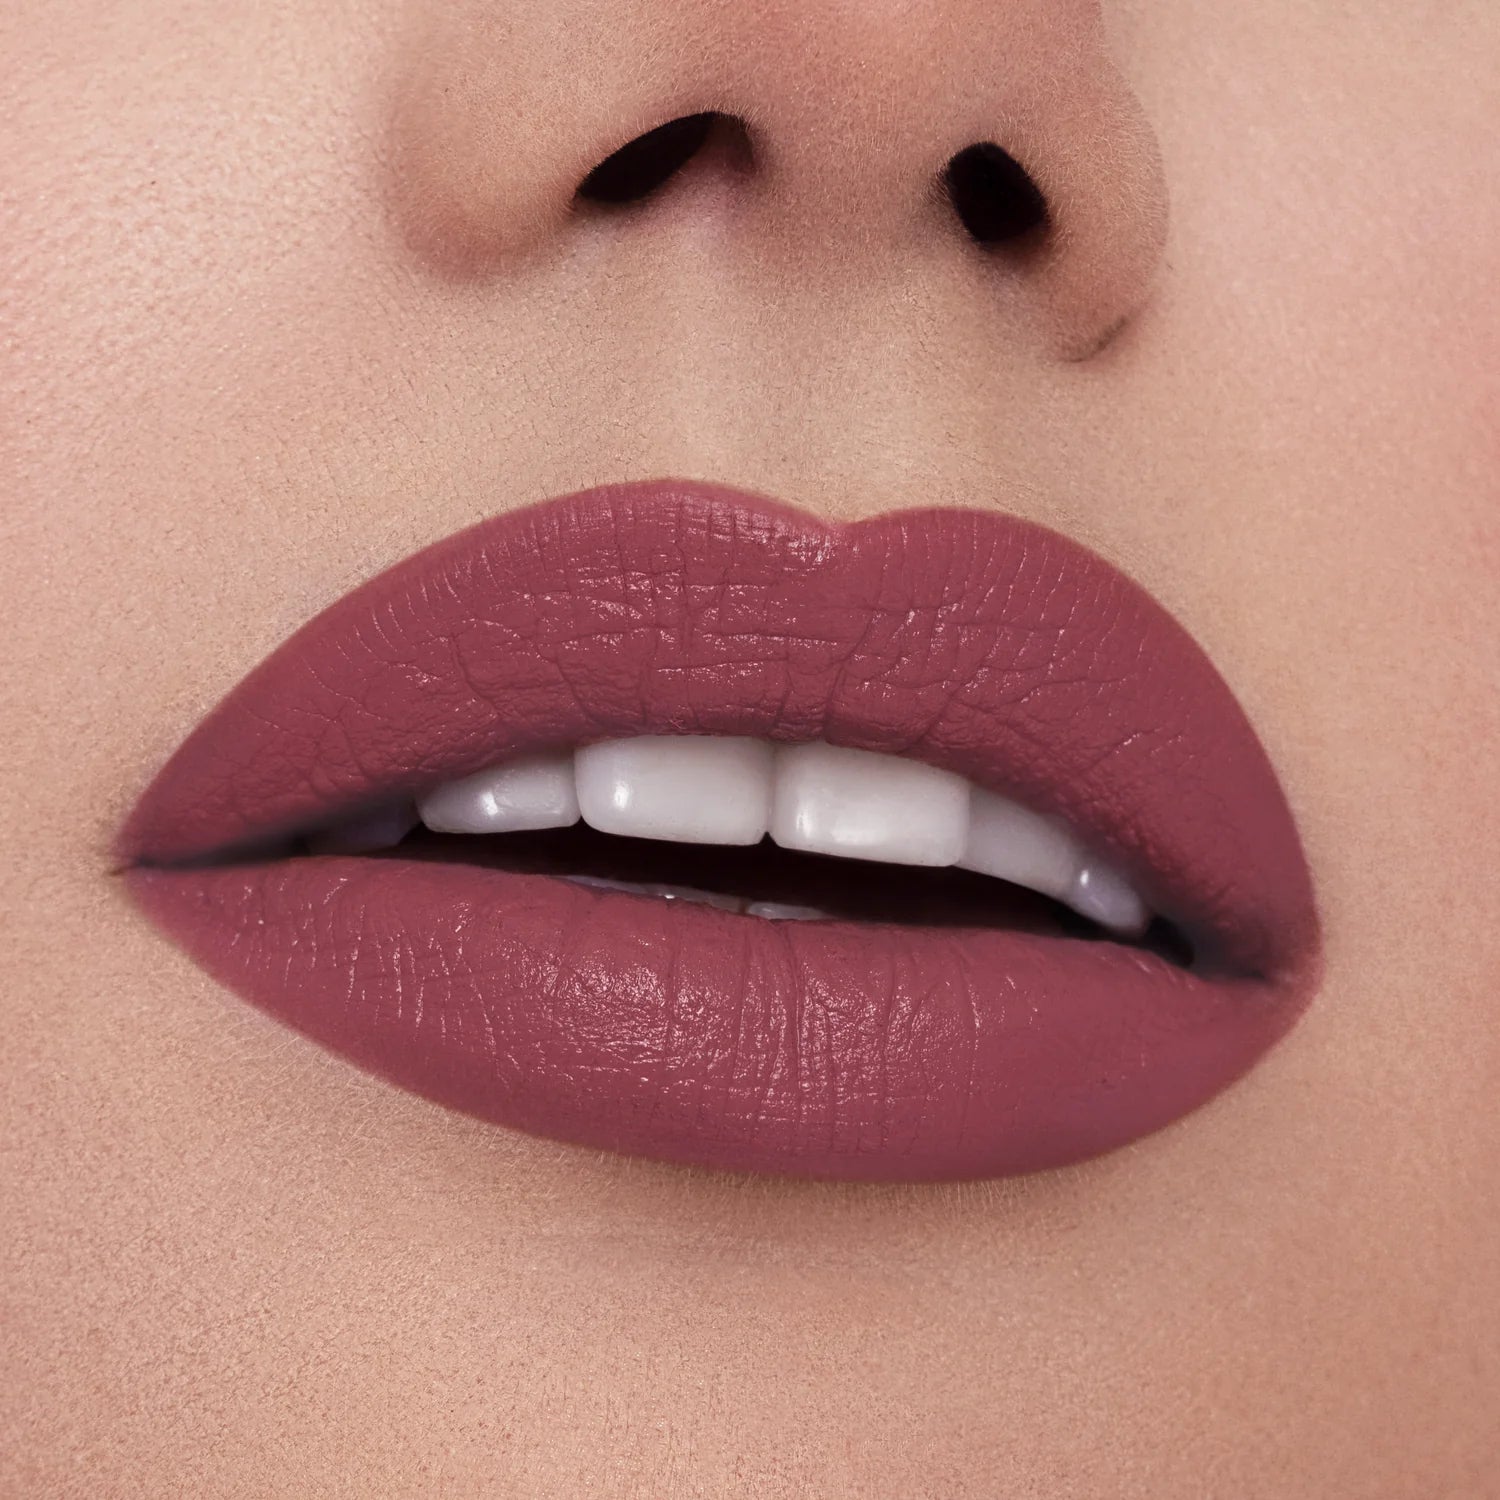 Beauty Creations - Tease Me Collection Lipstick - Fool In Love